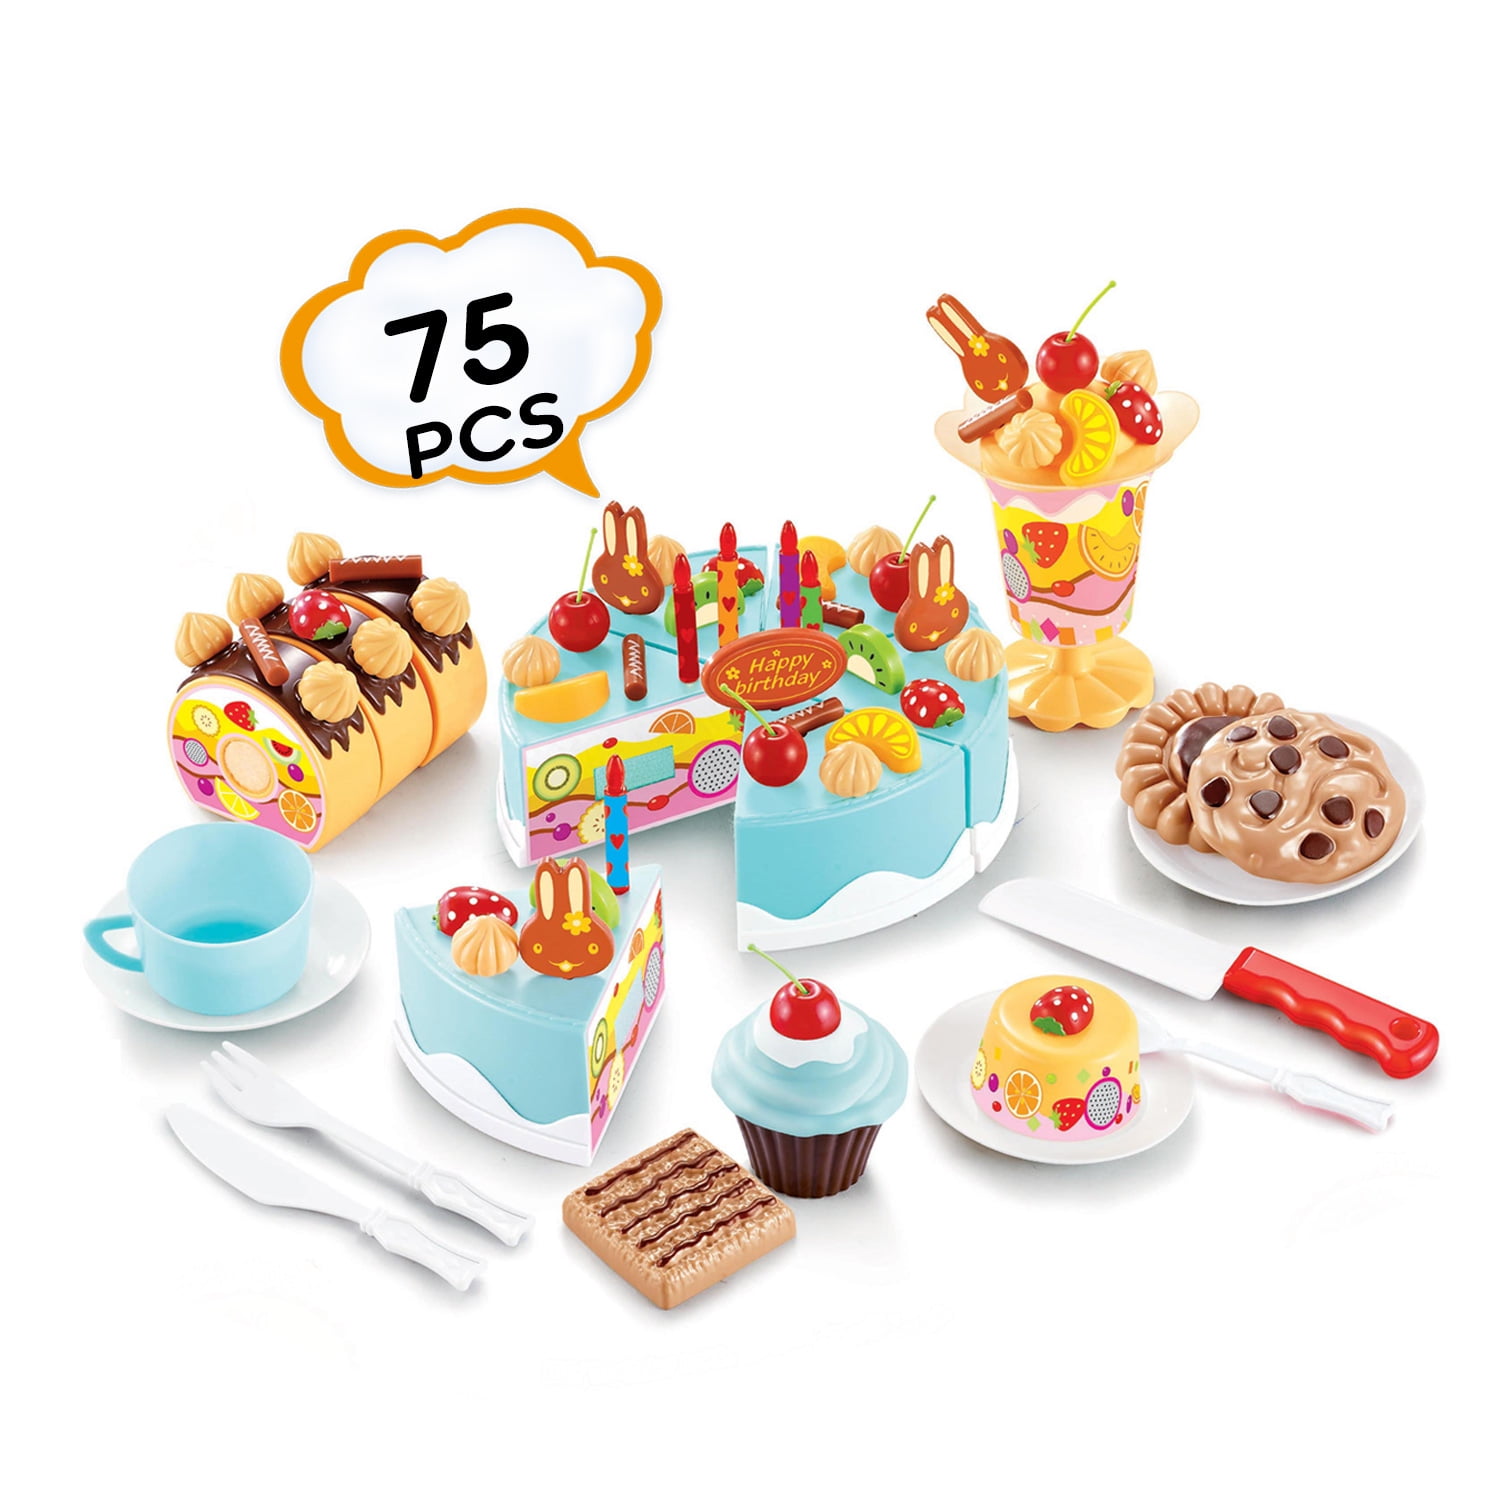 Hooga Play Food Wooden Birthday Cake Party Toy Cutting Toy Pretend Toy 